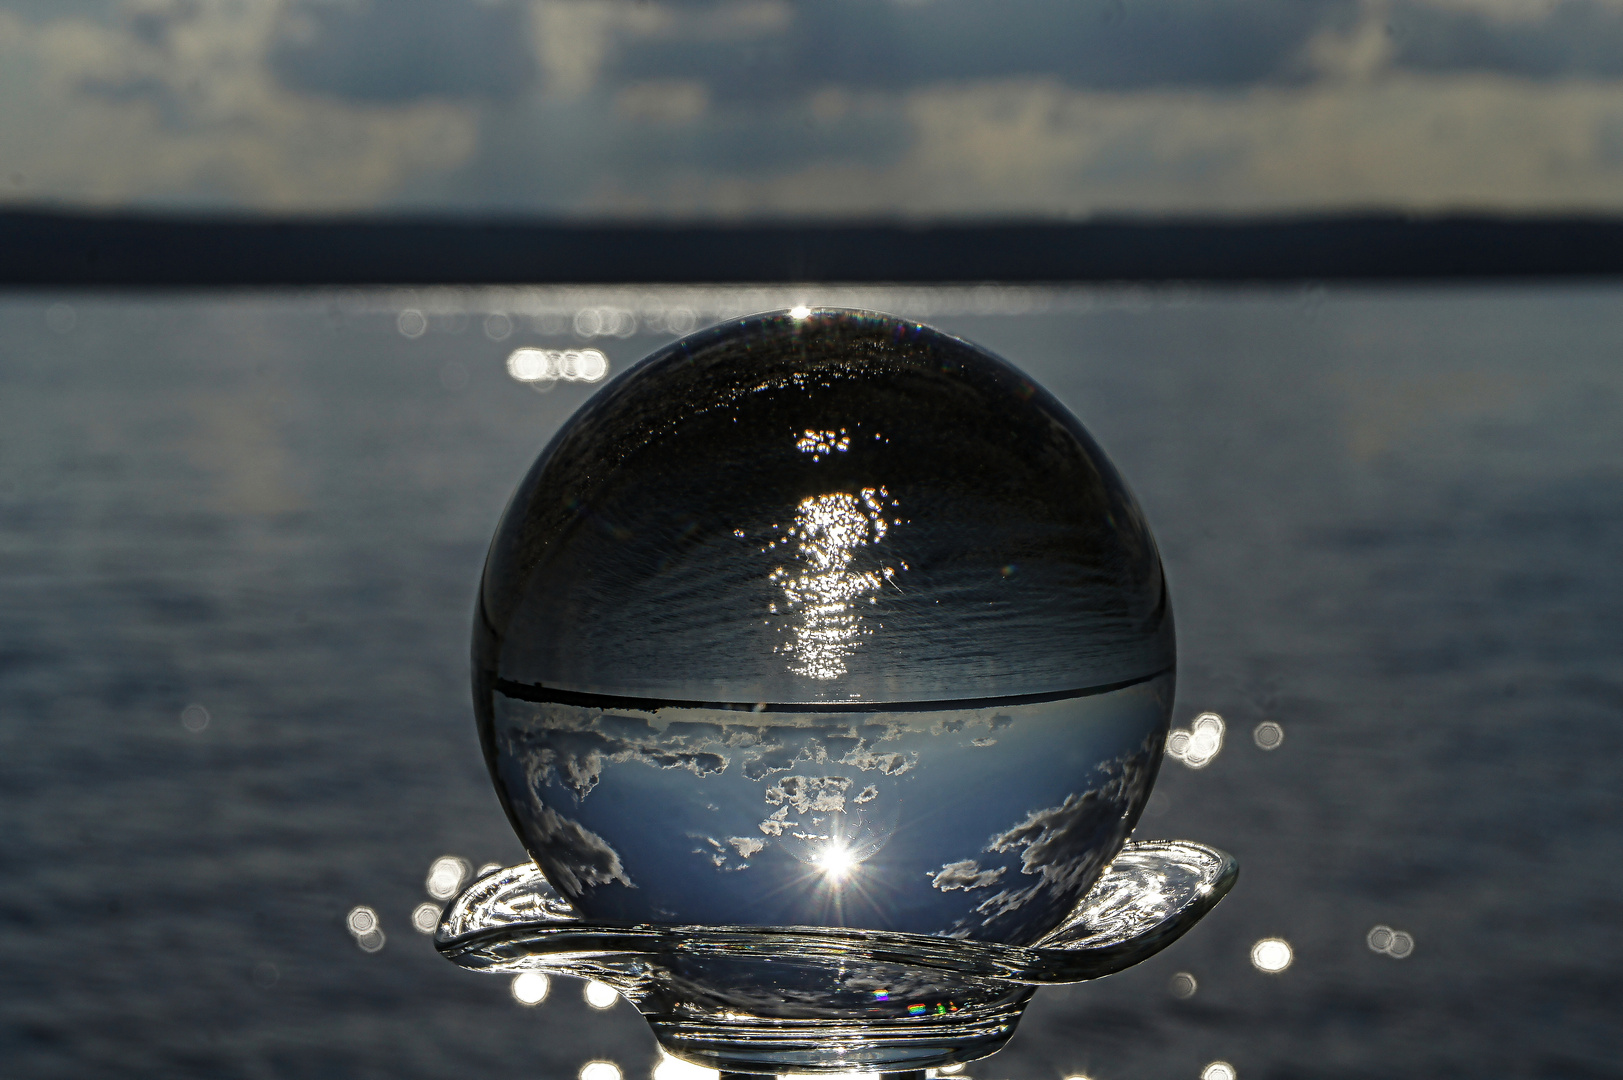 Lensball-Impressionen am Ammersee